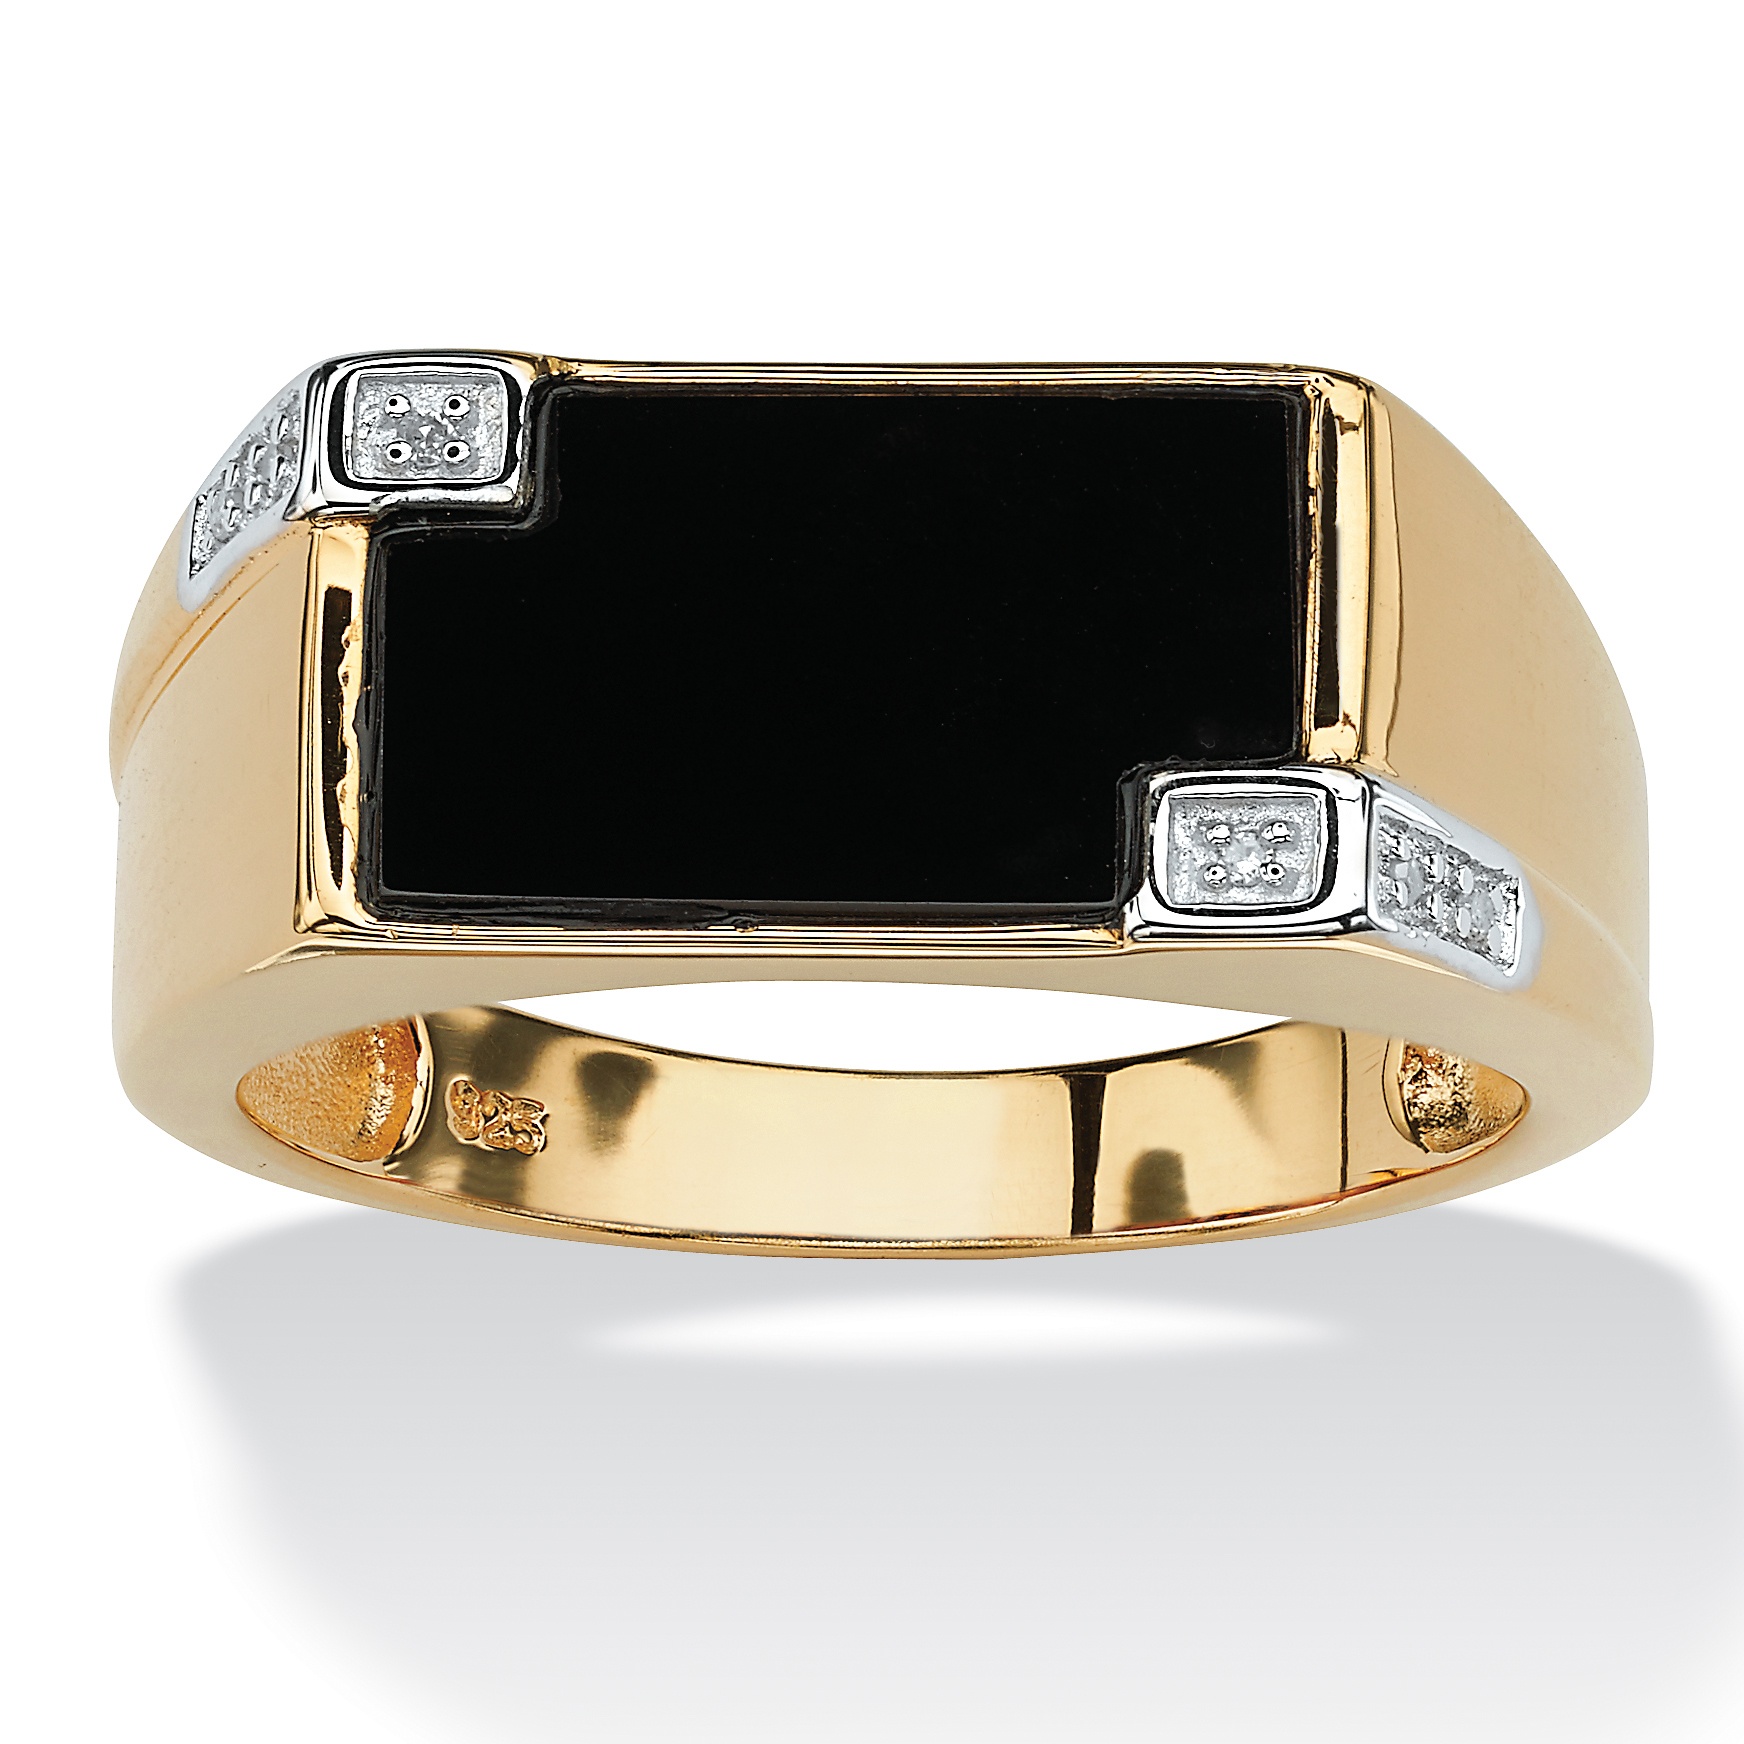 Men's Genuine Onyx and Diamond Accent Rectangular Ring in 14k Gold over ...